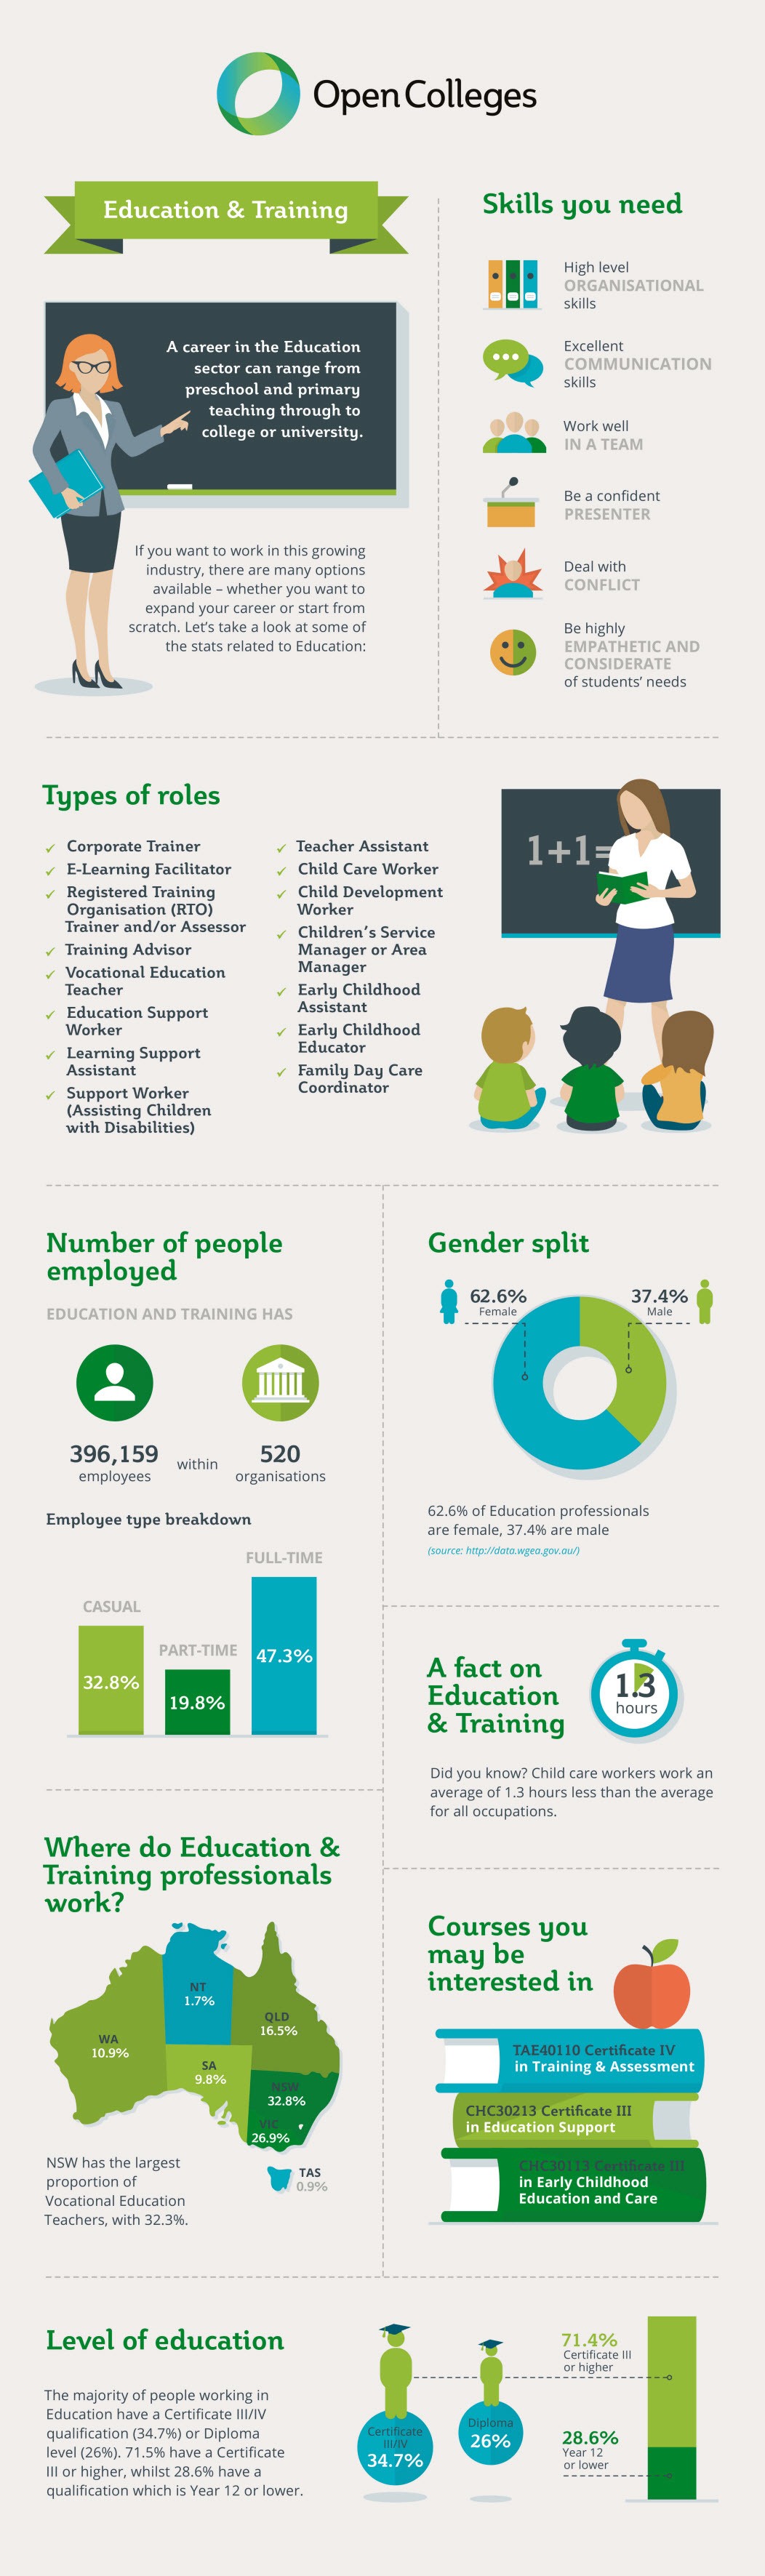 Your Career In Education And Training Infographic